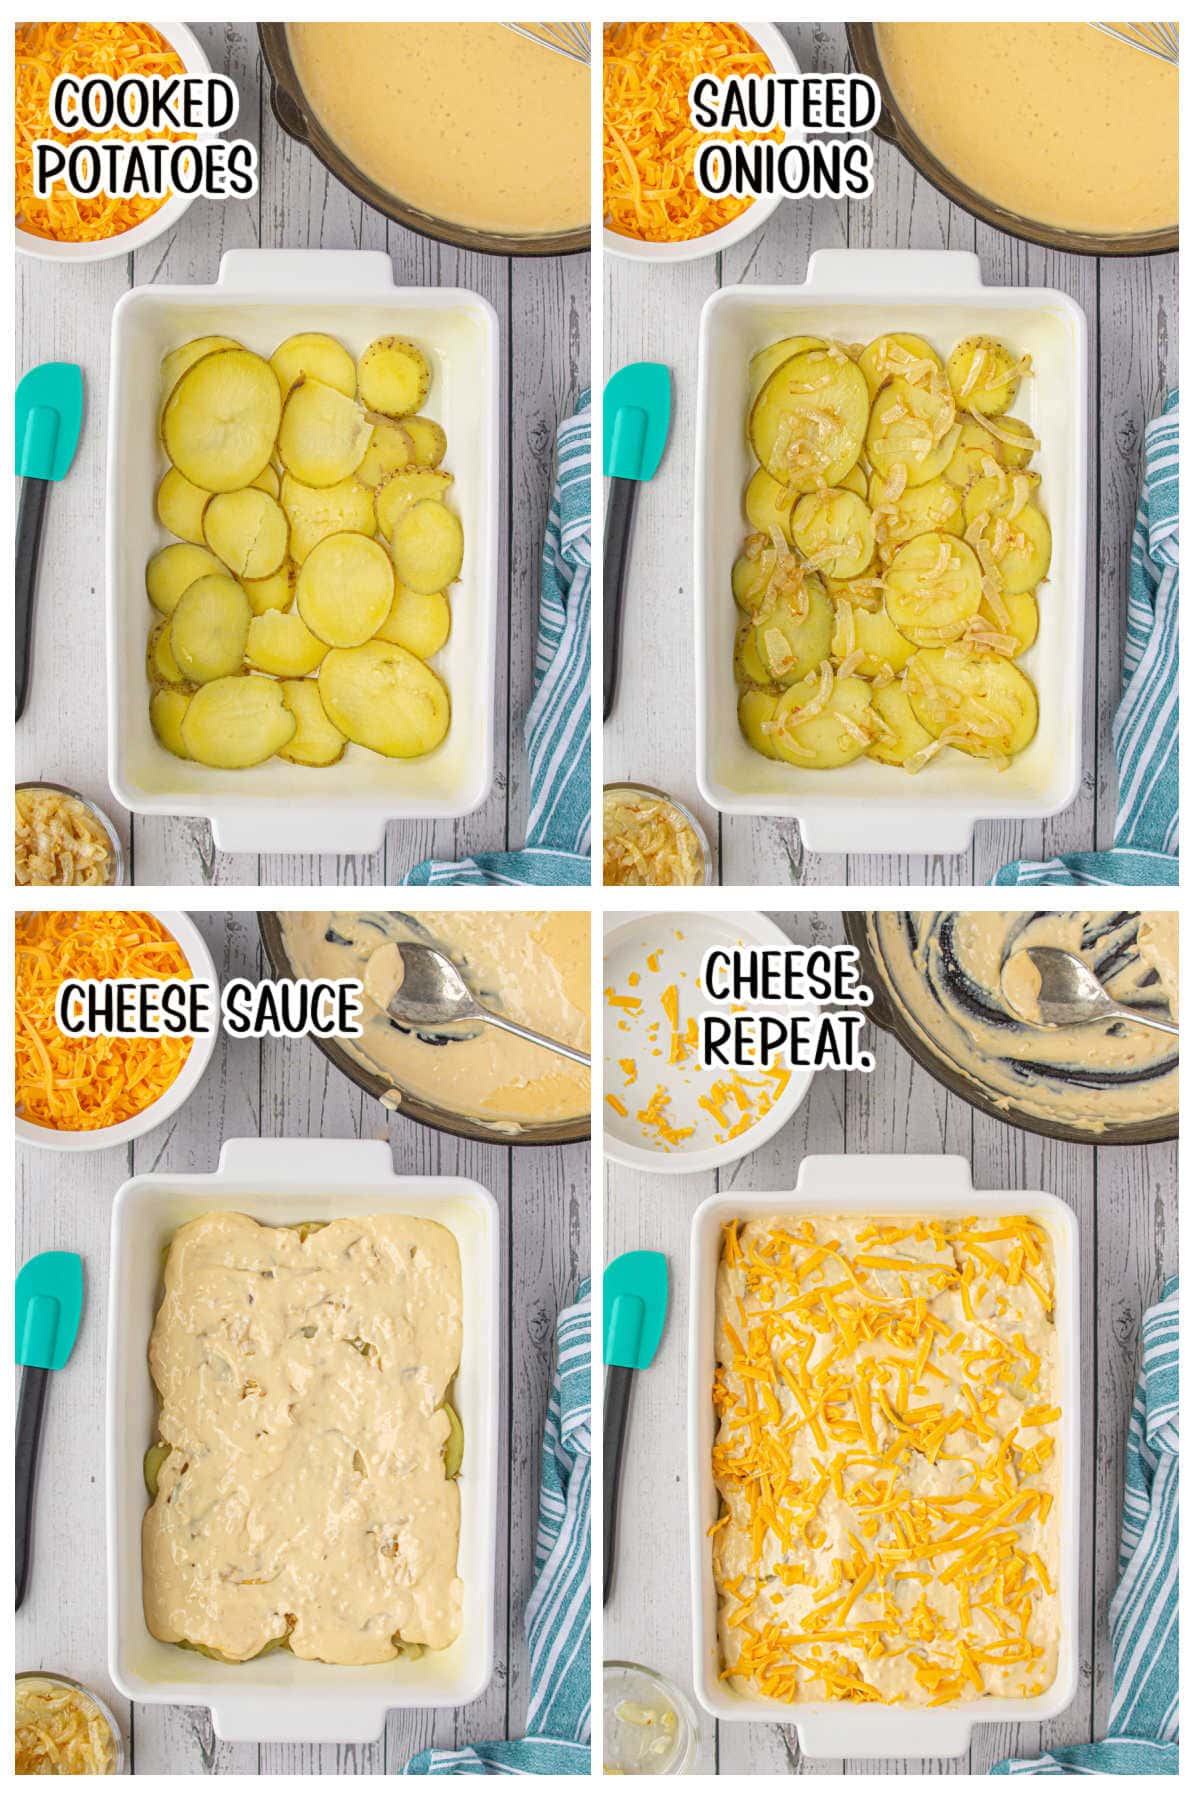 Steps for layering the potatoes and cheese.